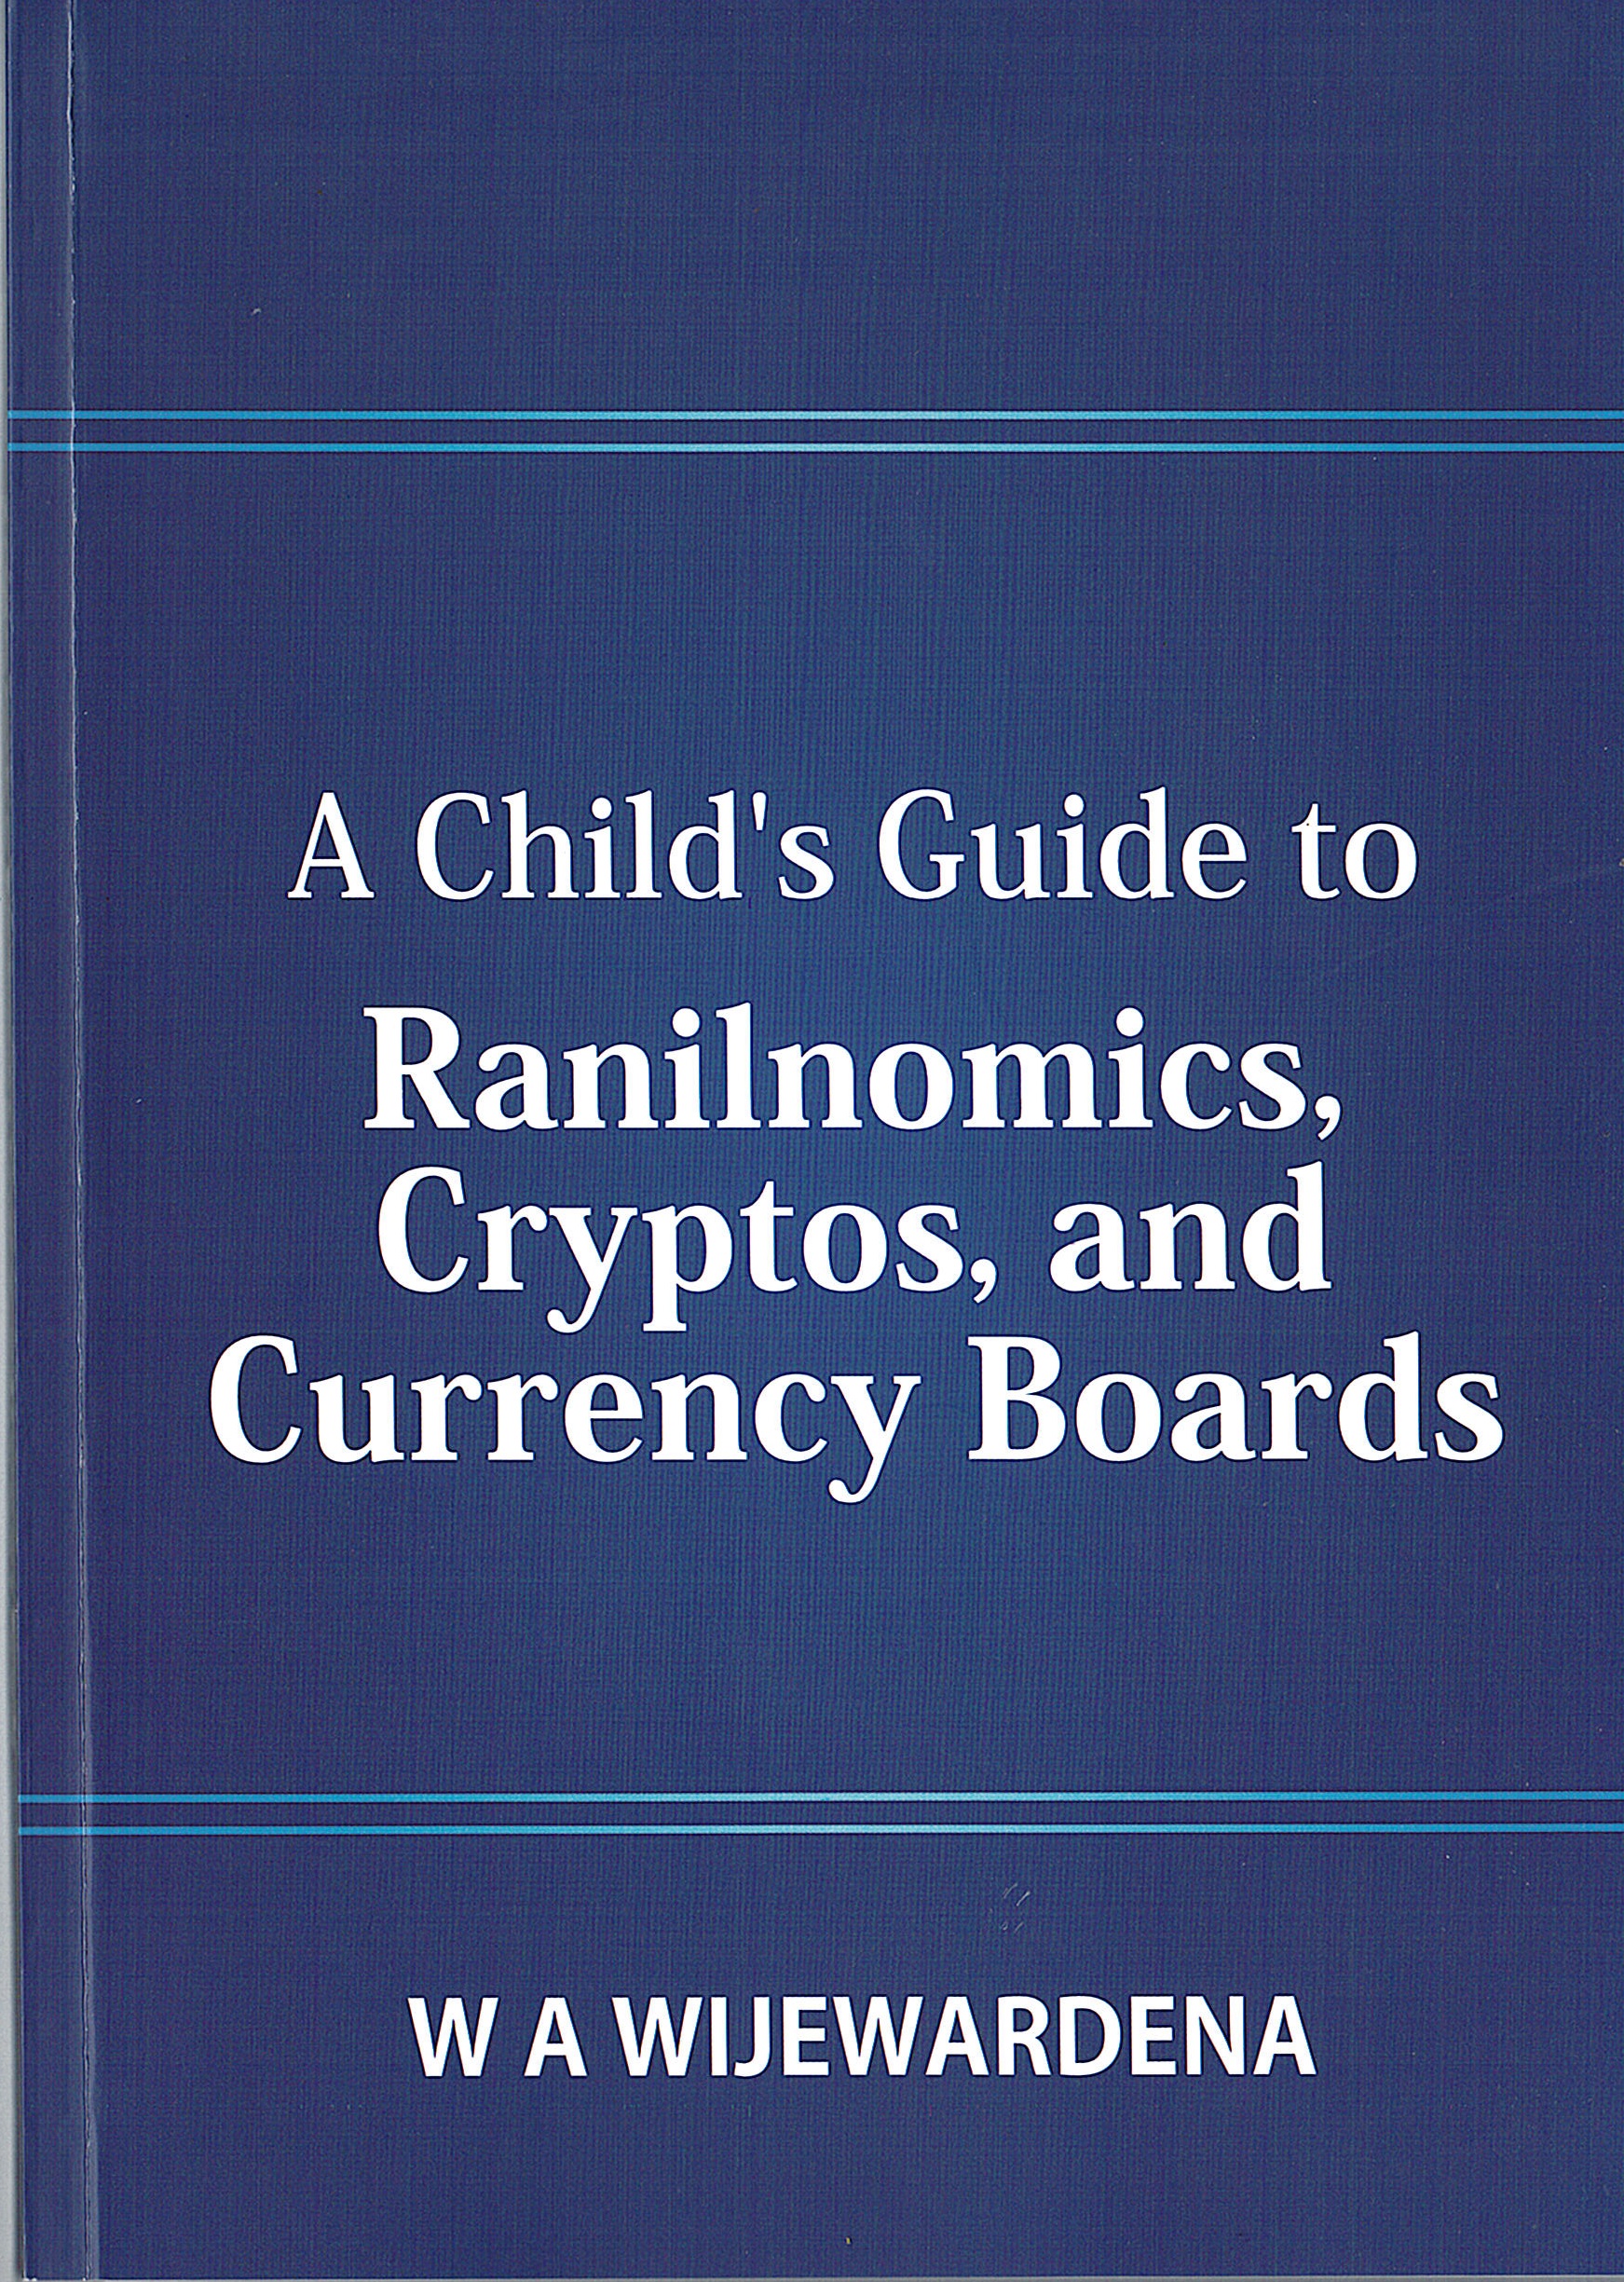 A Child’s Guide to Ranilnomics, Cryptos, and Currency Boards